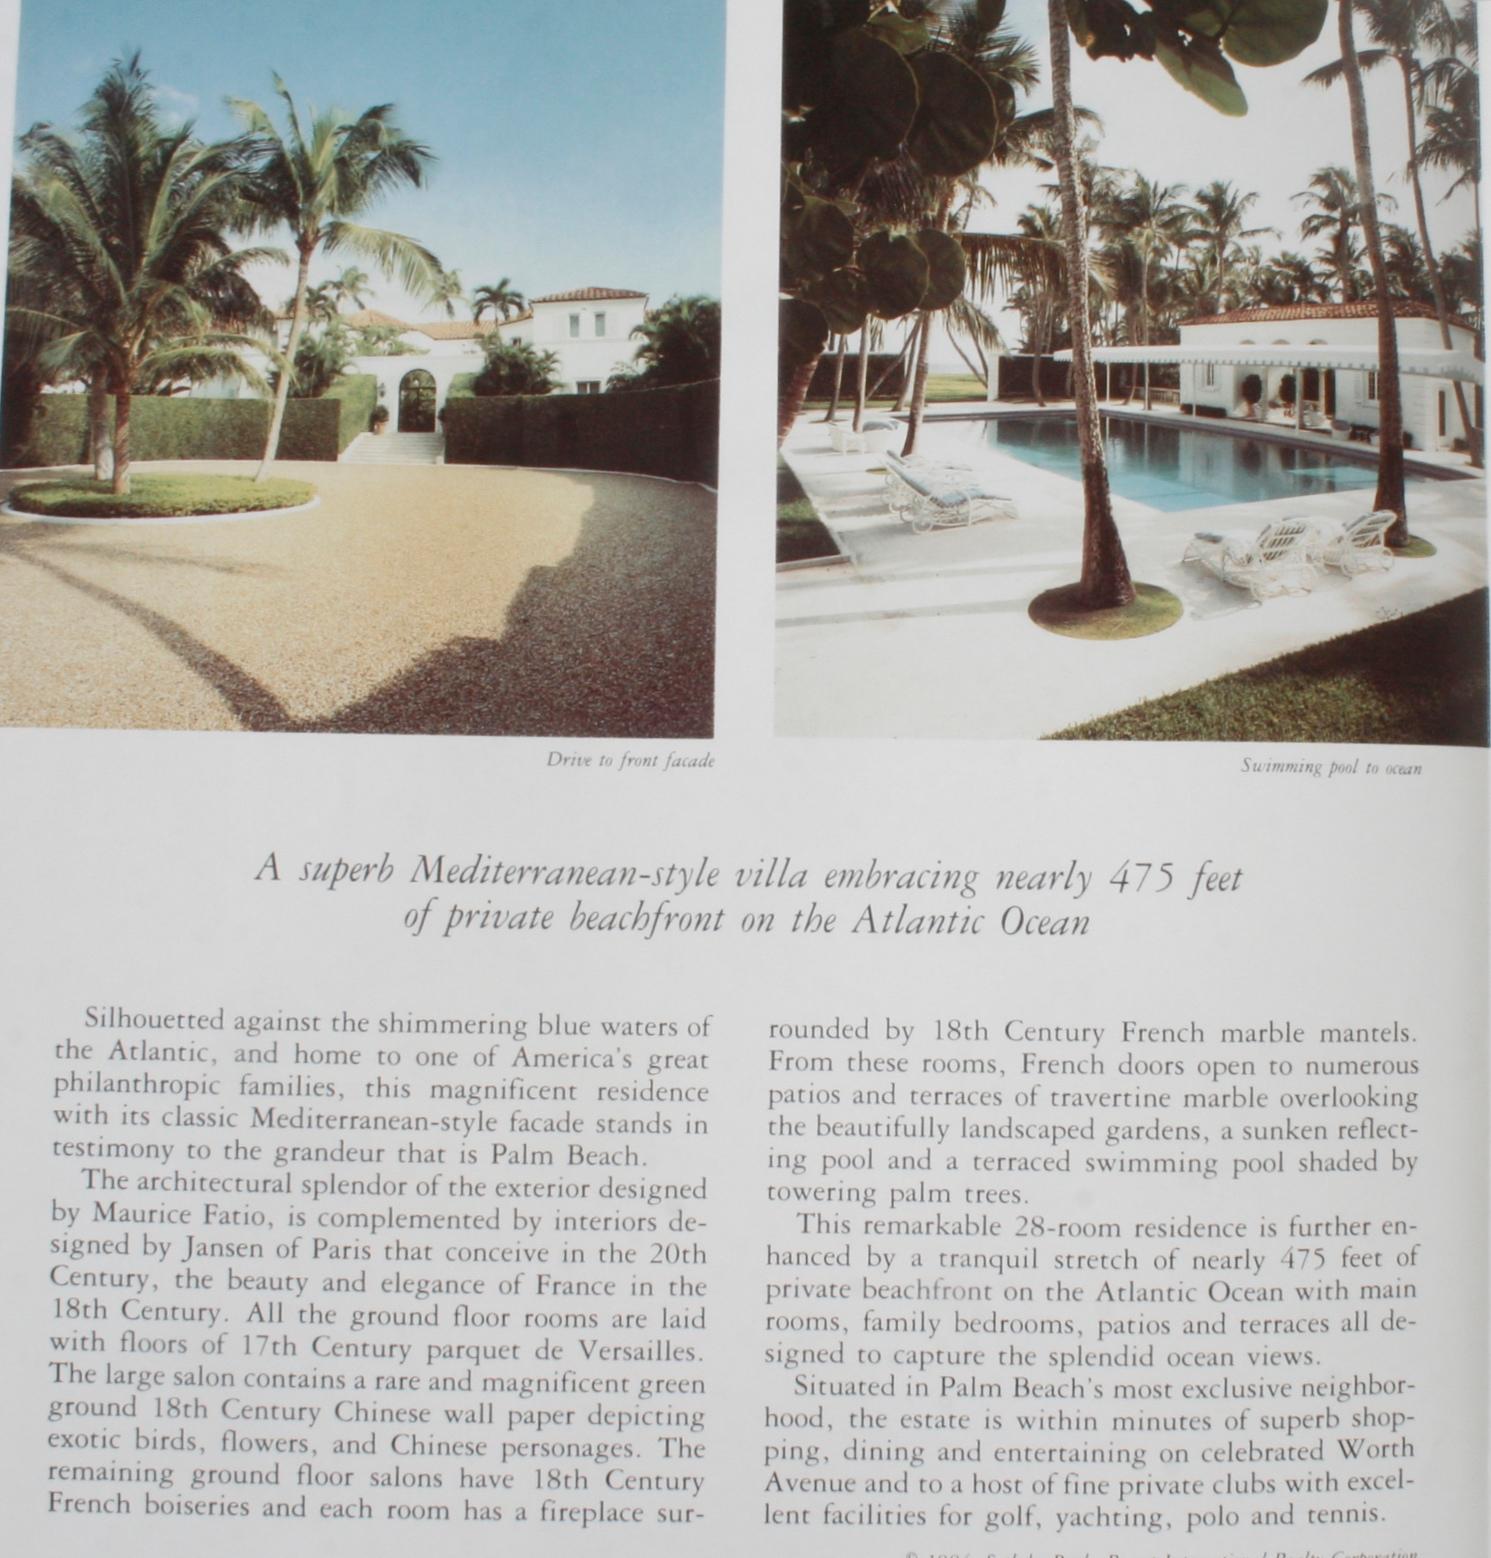 Sotheby's Auction Catalogue for The Mrs. Charles Wrightsman Palm Beach Estate 12